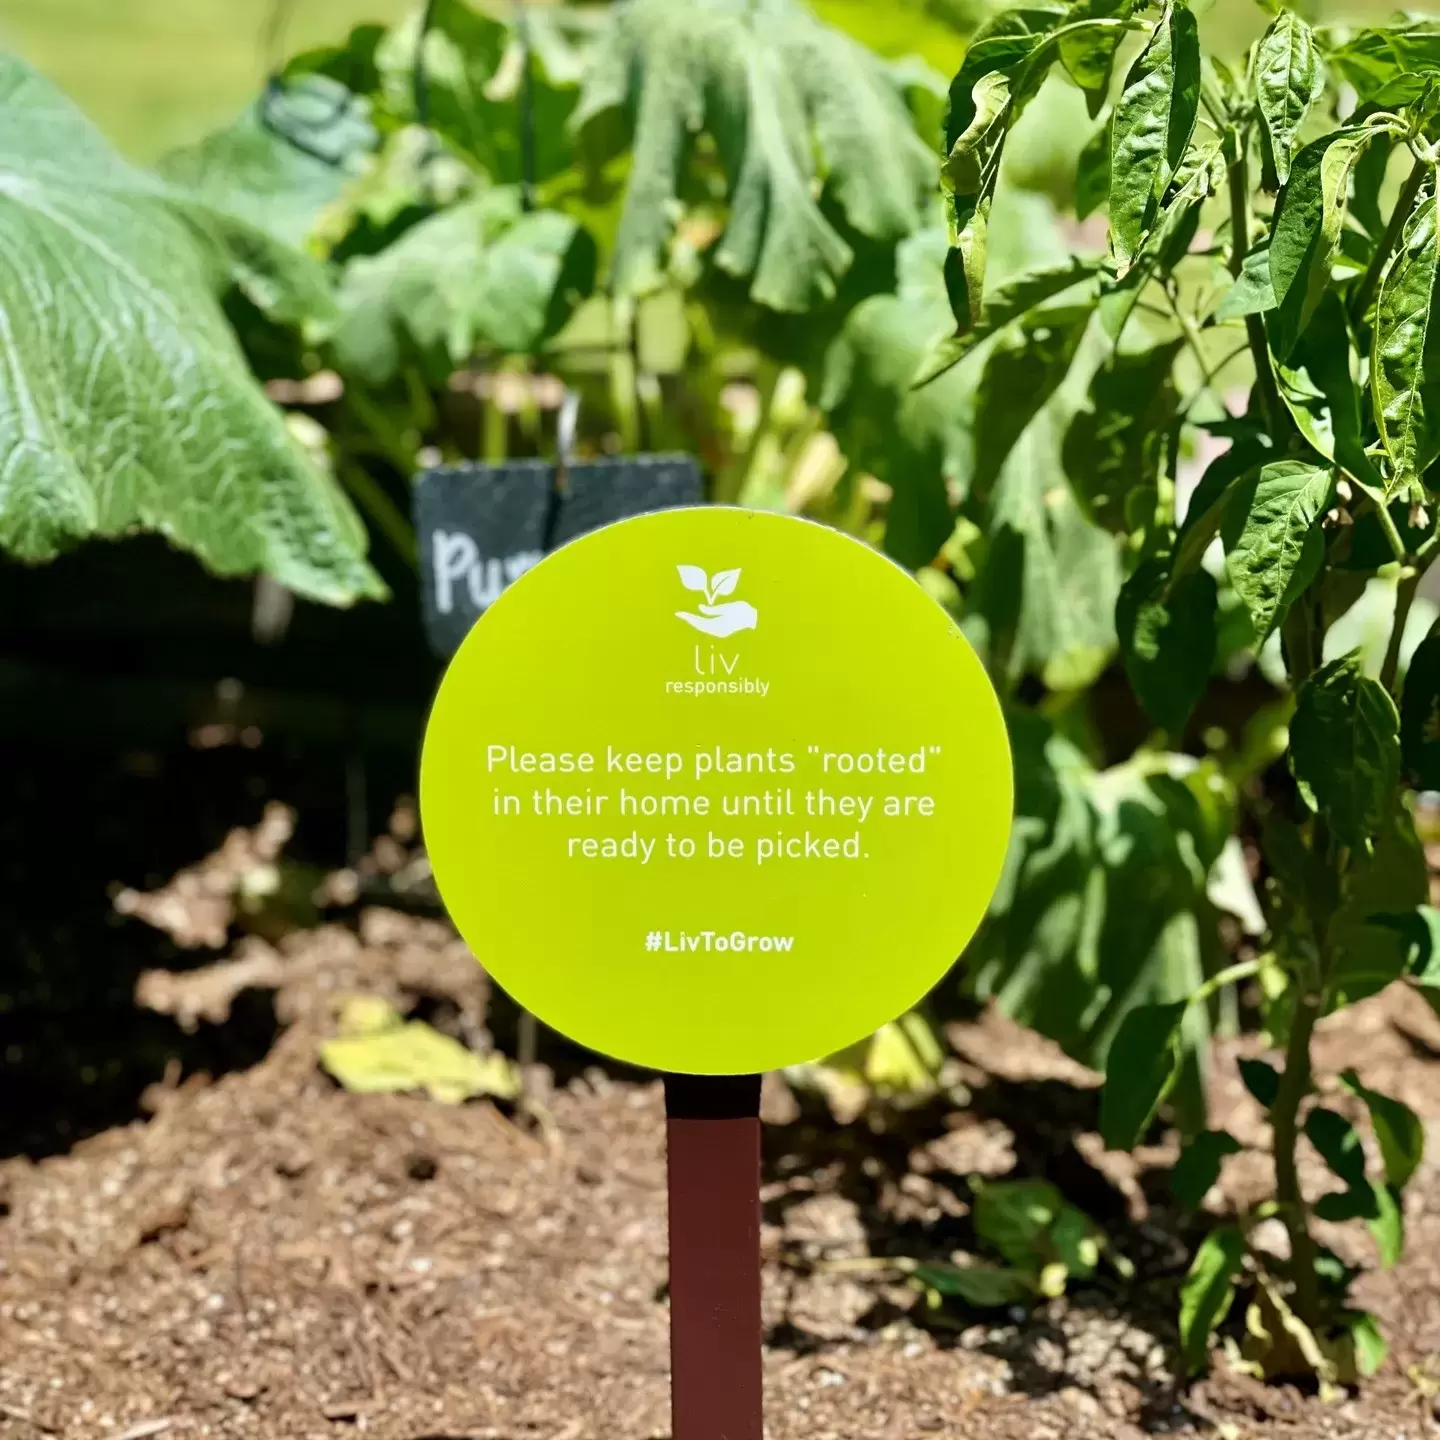 The fresh veggies and herbs at the Liv Garden are almost ready to enjoy. 😊

In the meantime, please keep them rooted and join us for Garden Club Tomorrow morning! 💚
.
.
.
#LivToGrow #LivLikeNoOther #LivGarden #LivResponsibly